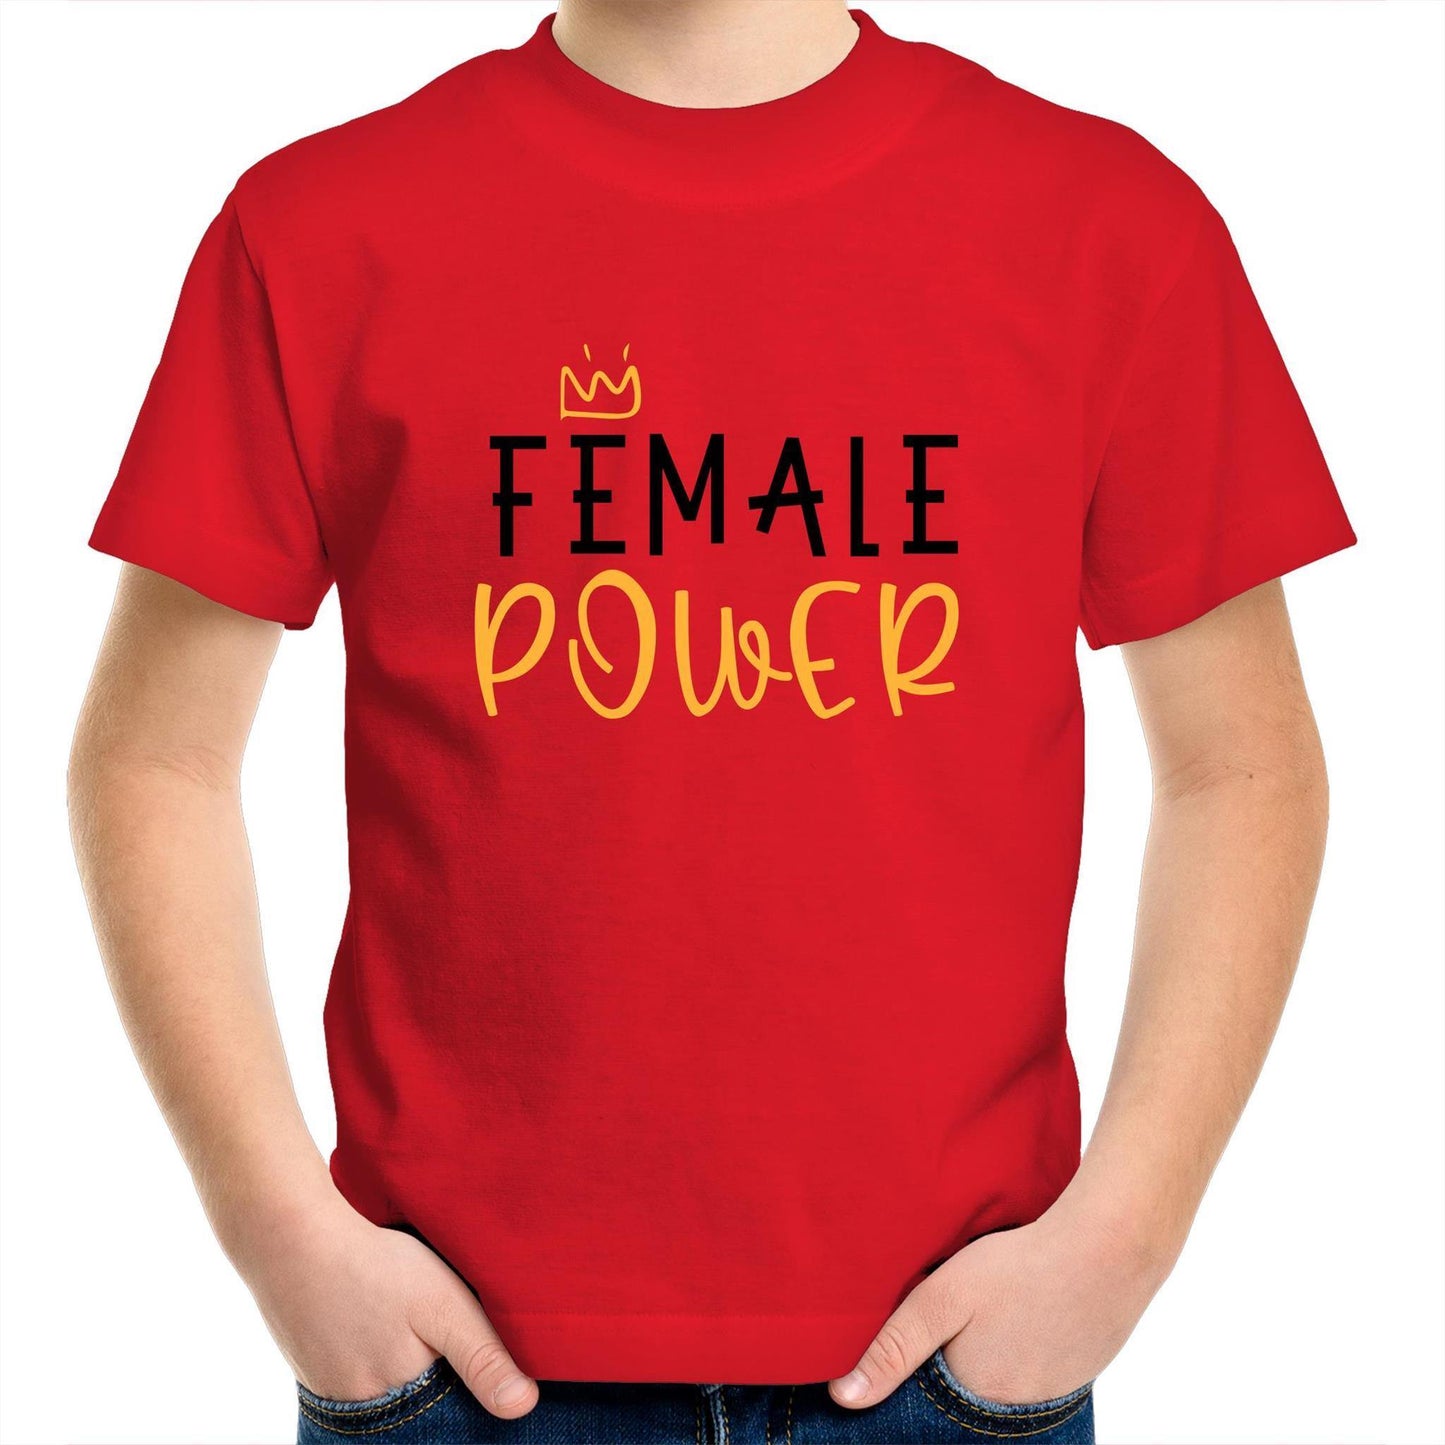 Female Power - Kids Youth Crew T-Shirt Red Kids Youth T-shirt